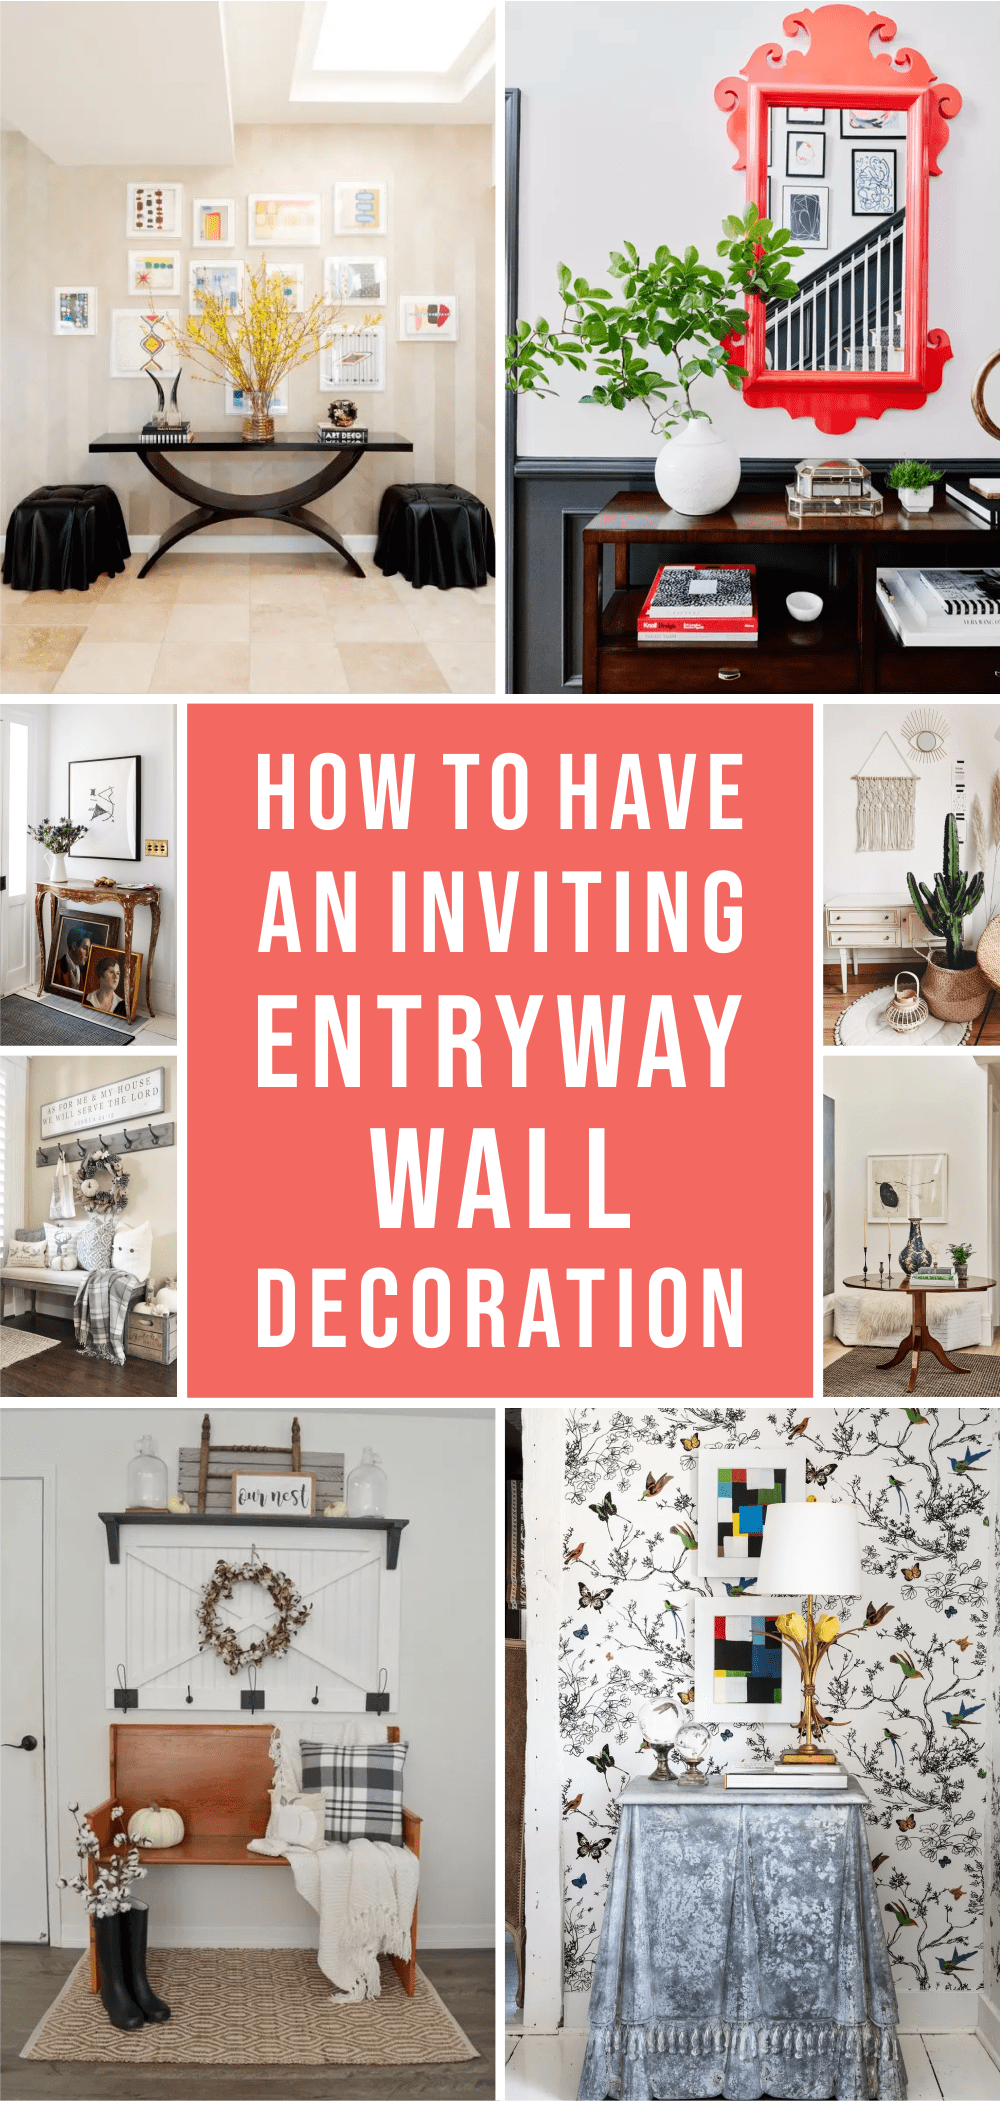 How to Have an Inviting Entryway Wall Decoration